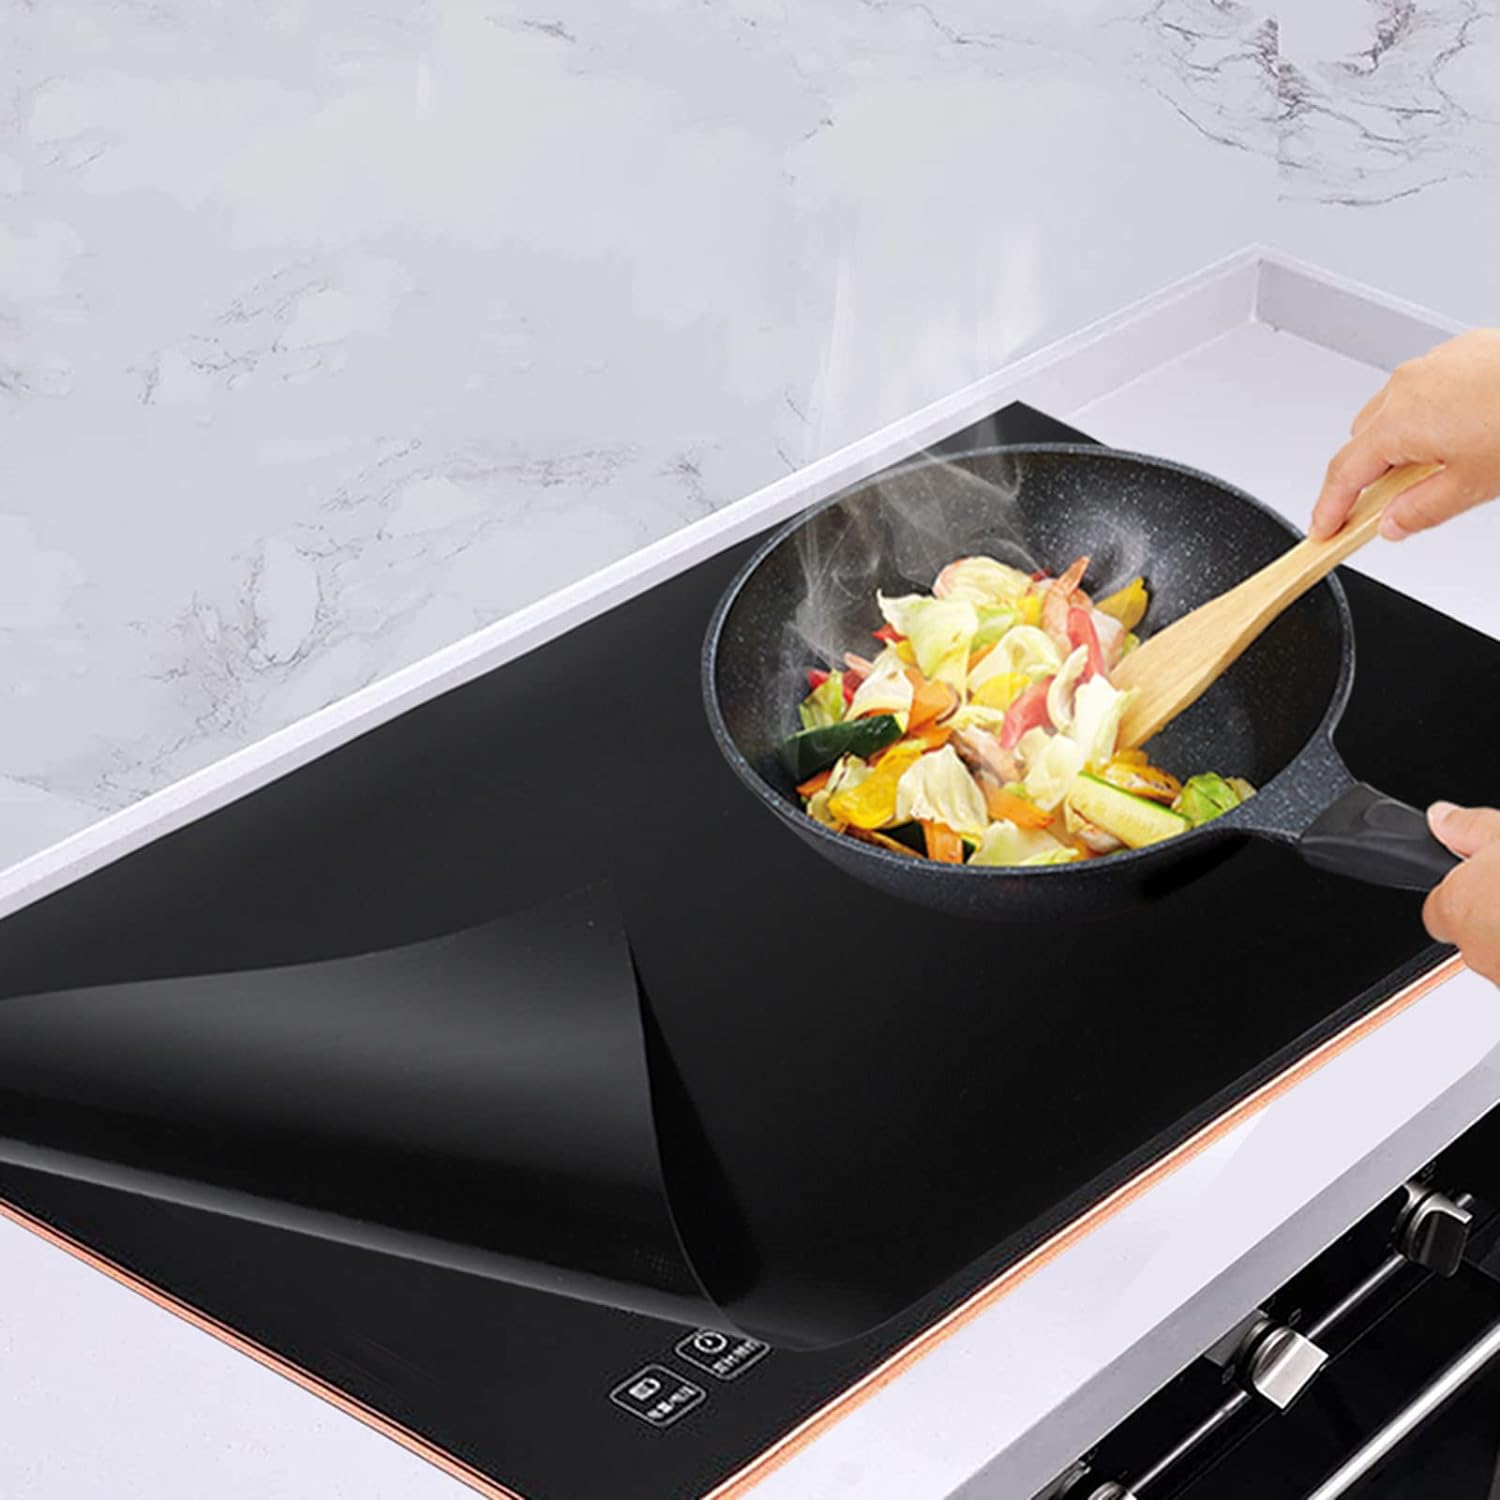 OMJMYY 78 x 52 Large Induction Hob Protector Mat Silicone Induction Hob Cover (Magnetic) Cooktop Scratch Protector Heat Resistant Anti Slip BPA Free for Induction Stove Multifunctional Silicone Mats - Amazing Gadgets Outlet